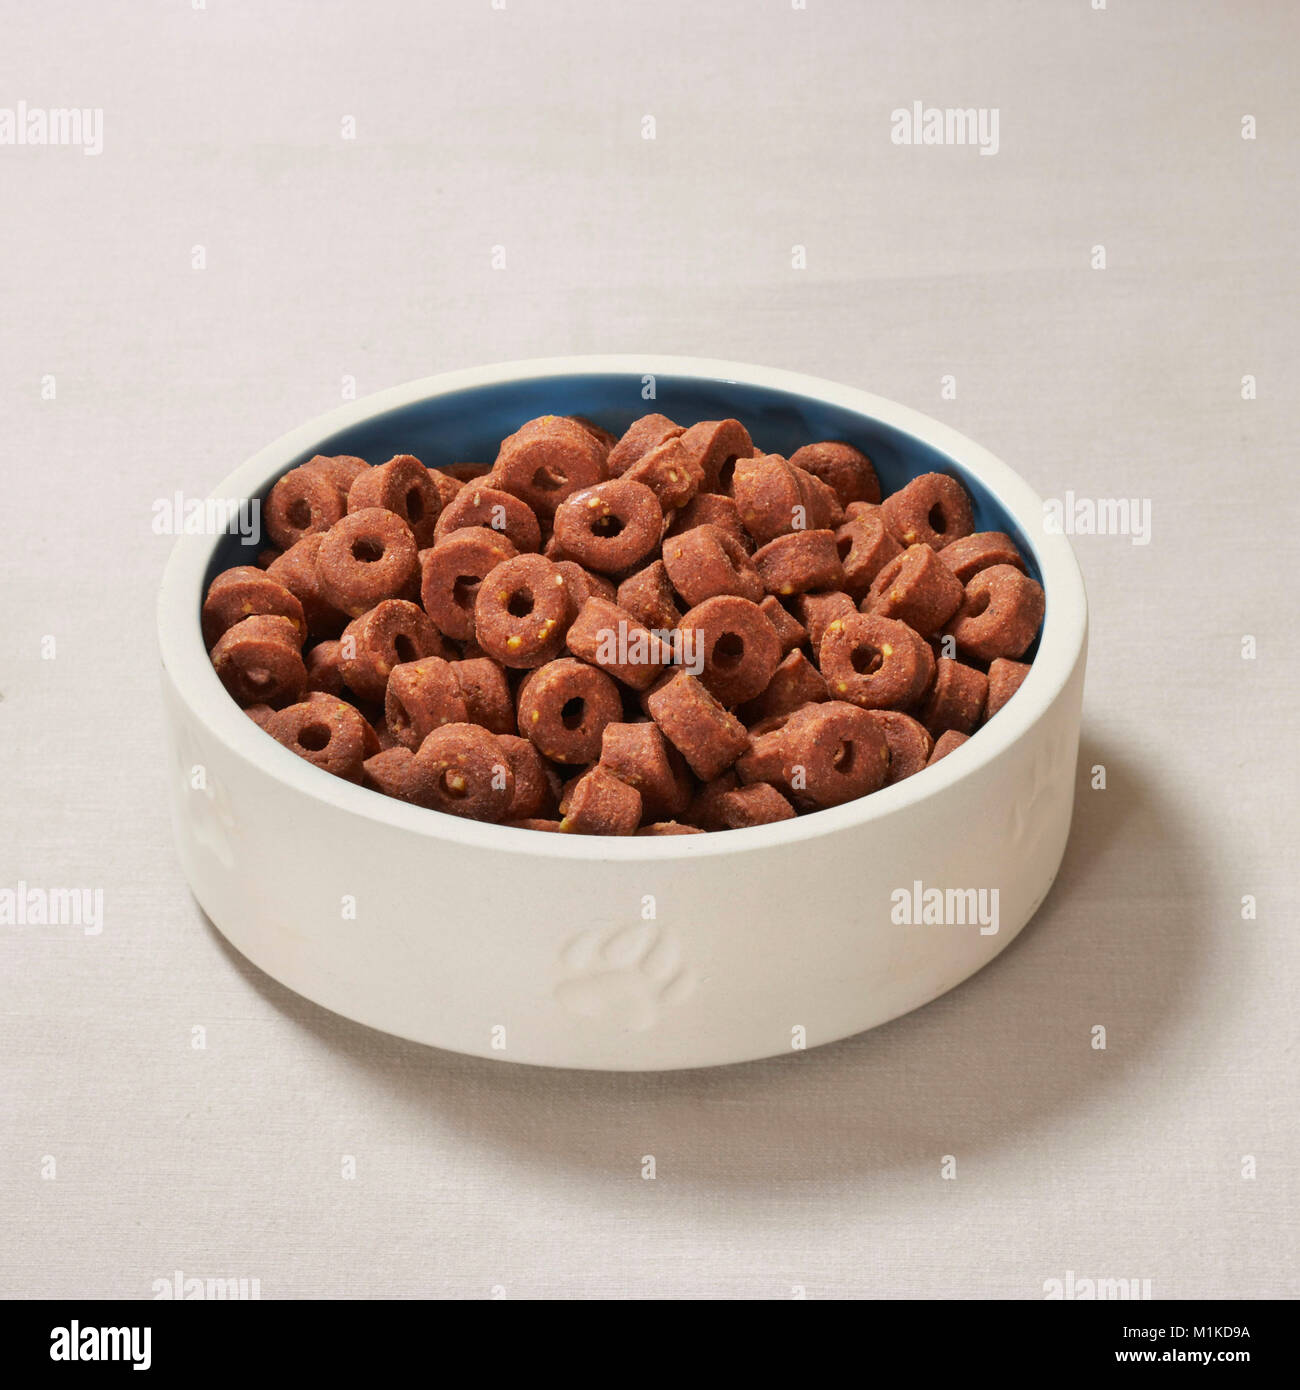 Domestic dog. Food bowl filled with semi-moist feed seen against a white background Germany Stock Photo